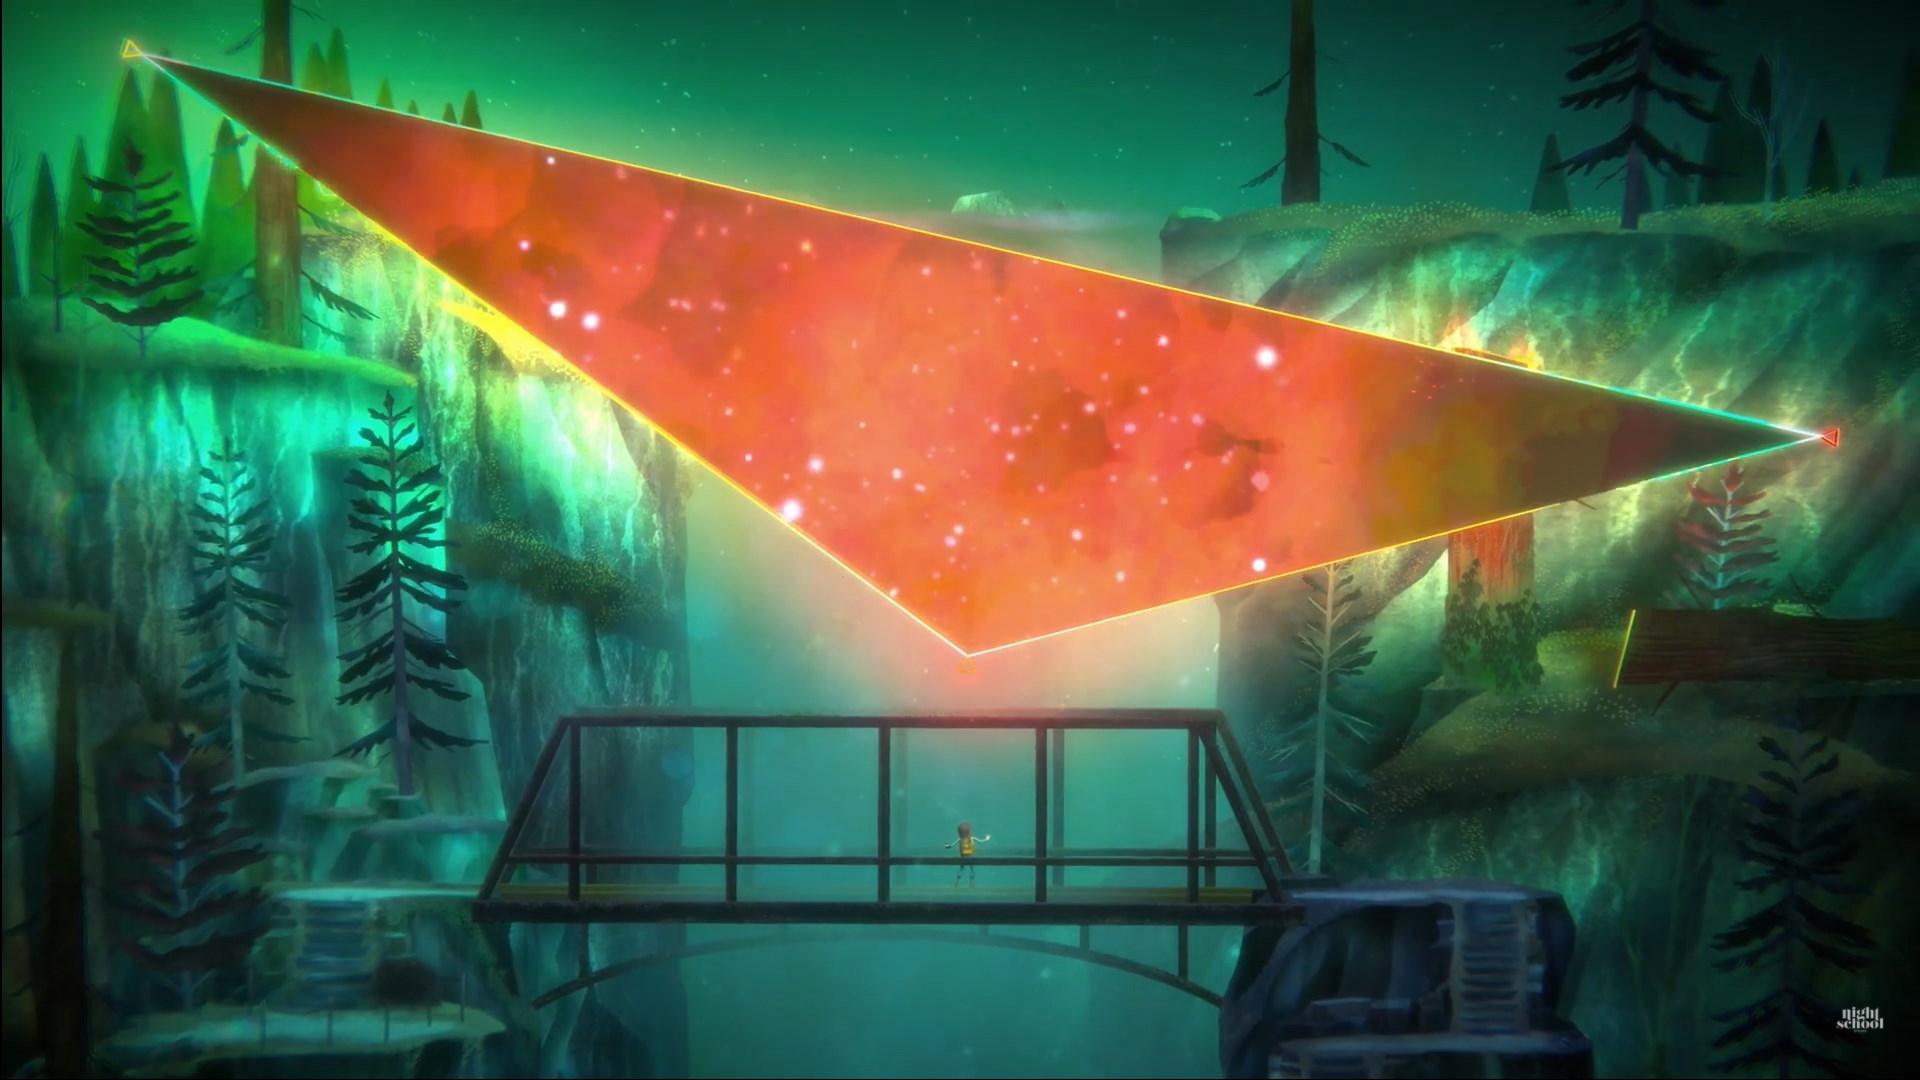 download oxenfree 2 xbox one